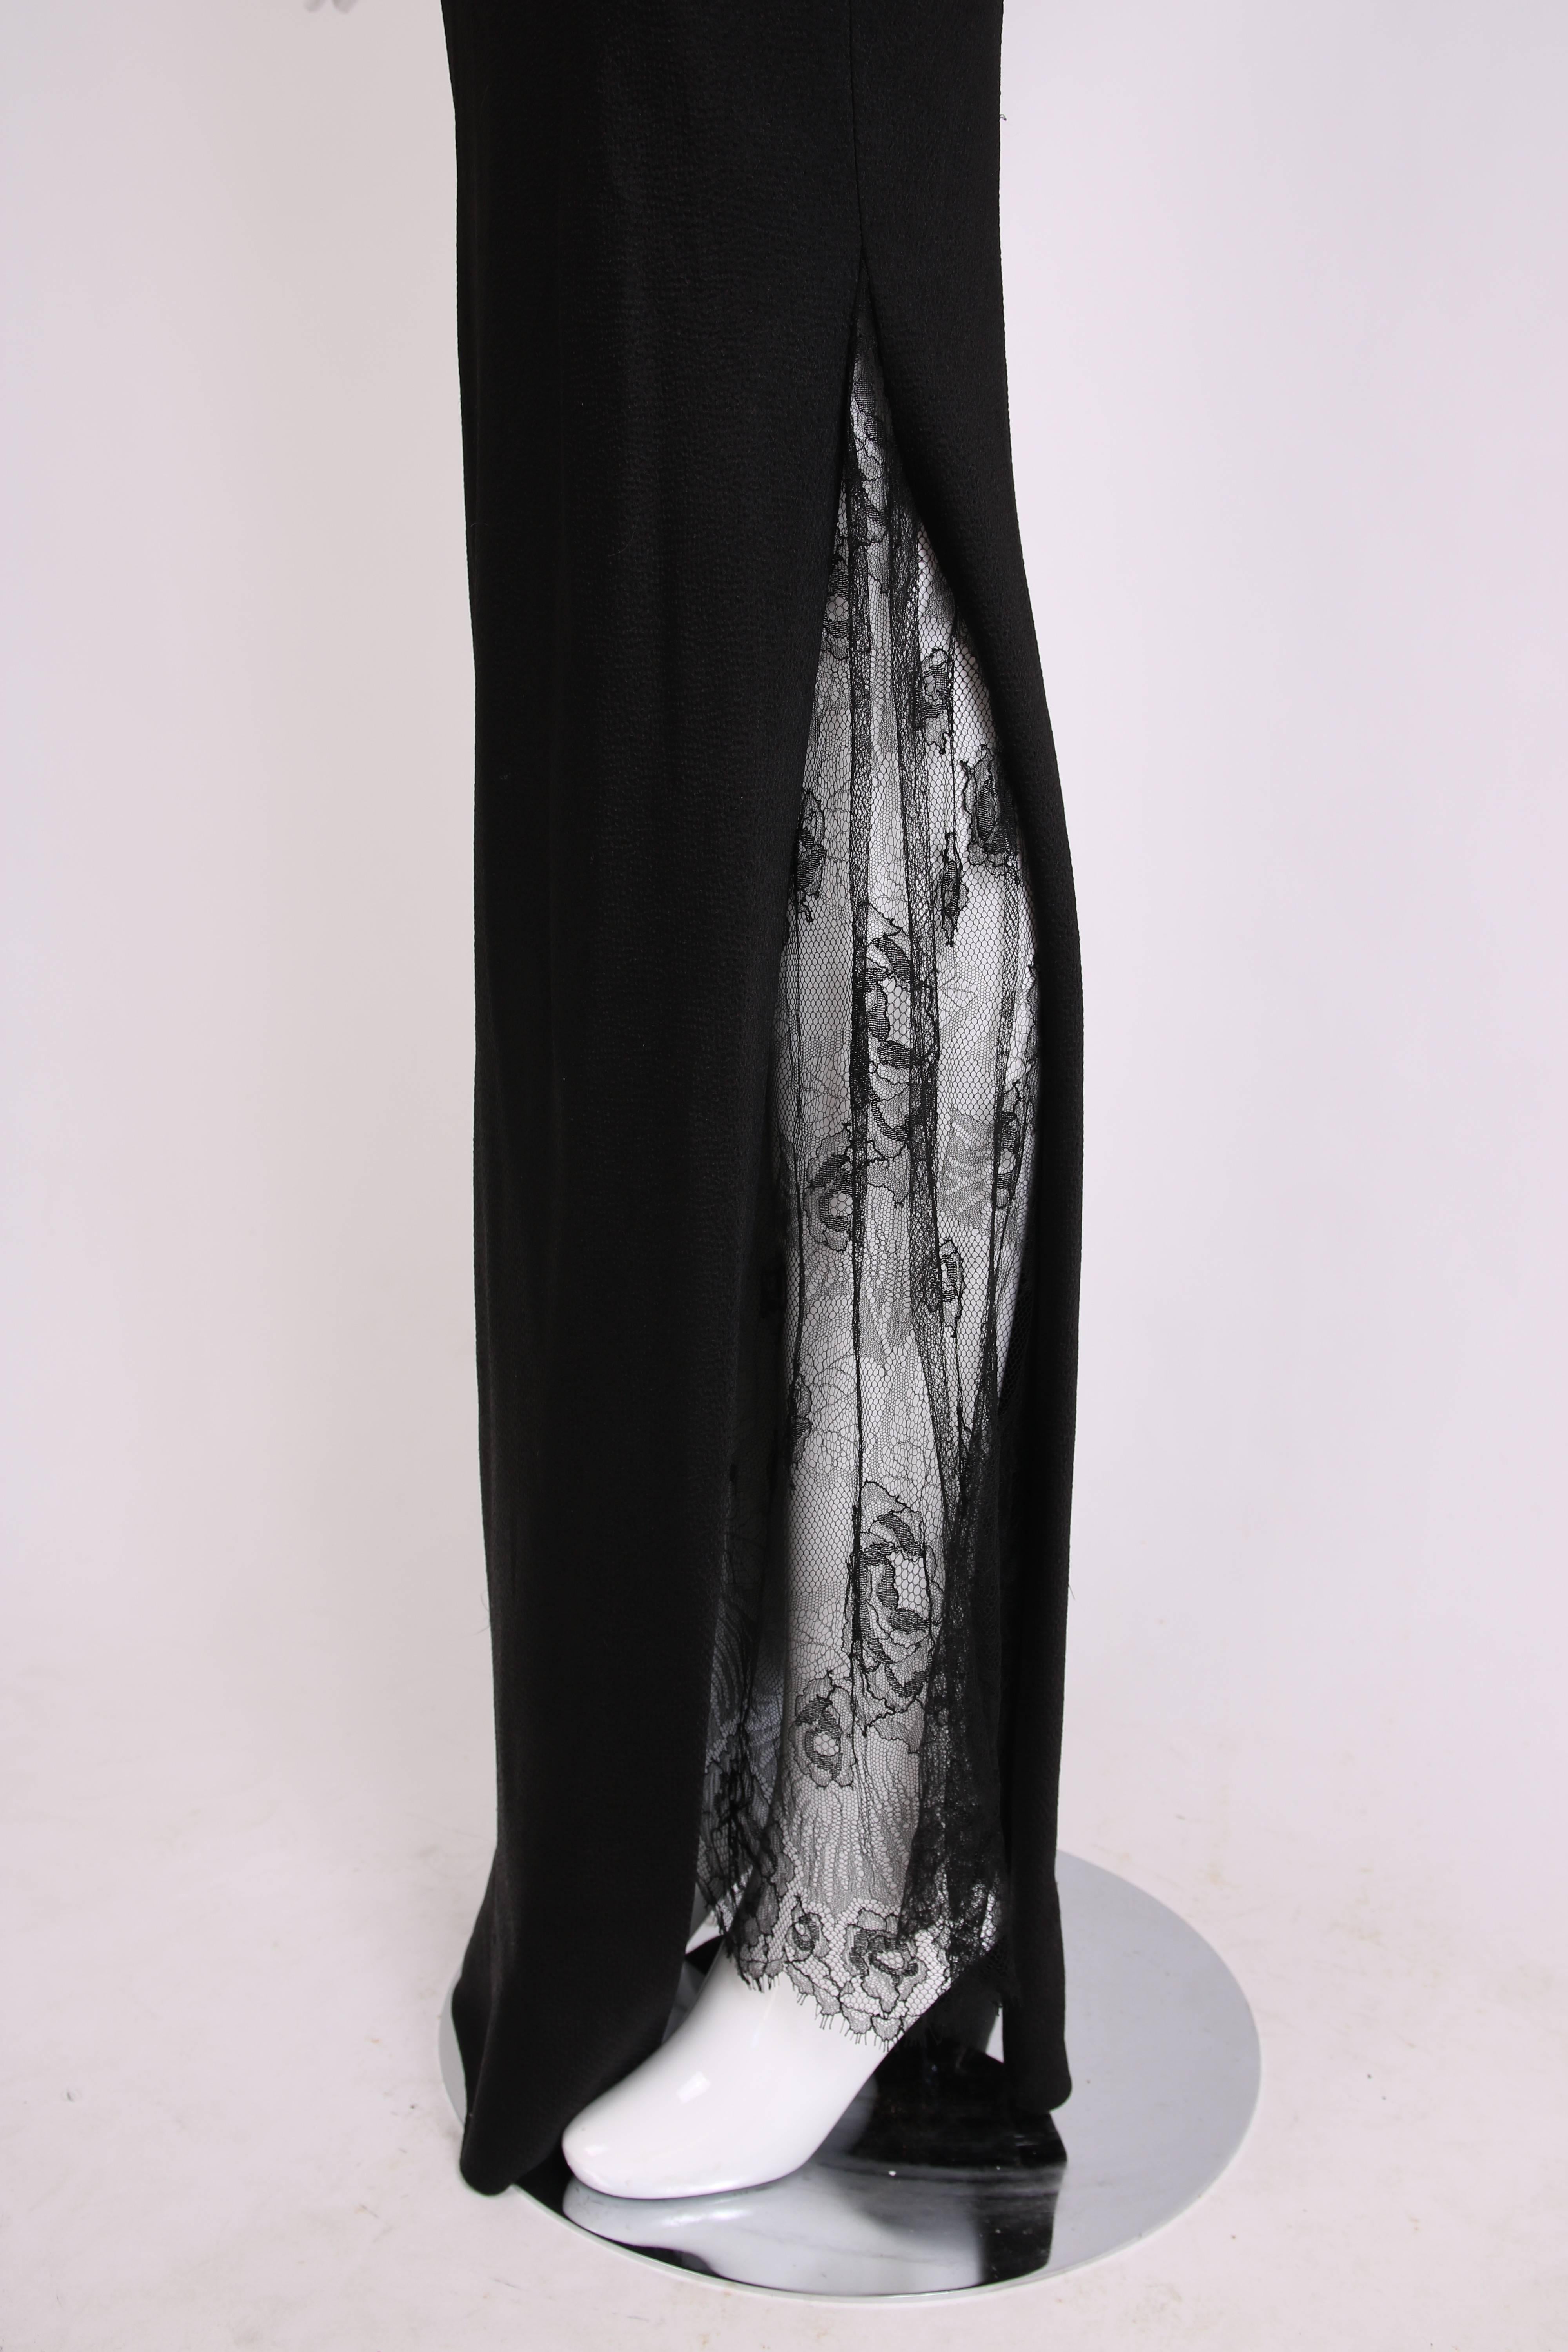 Christian Dior by Galliano Black Sleeveless Evening Gown w/Lace Inset Side Slit 2